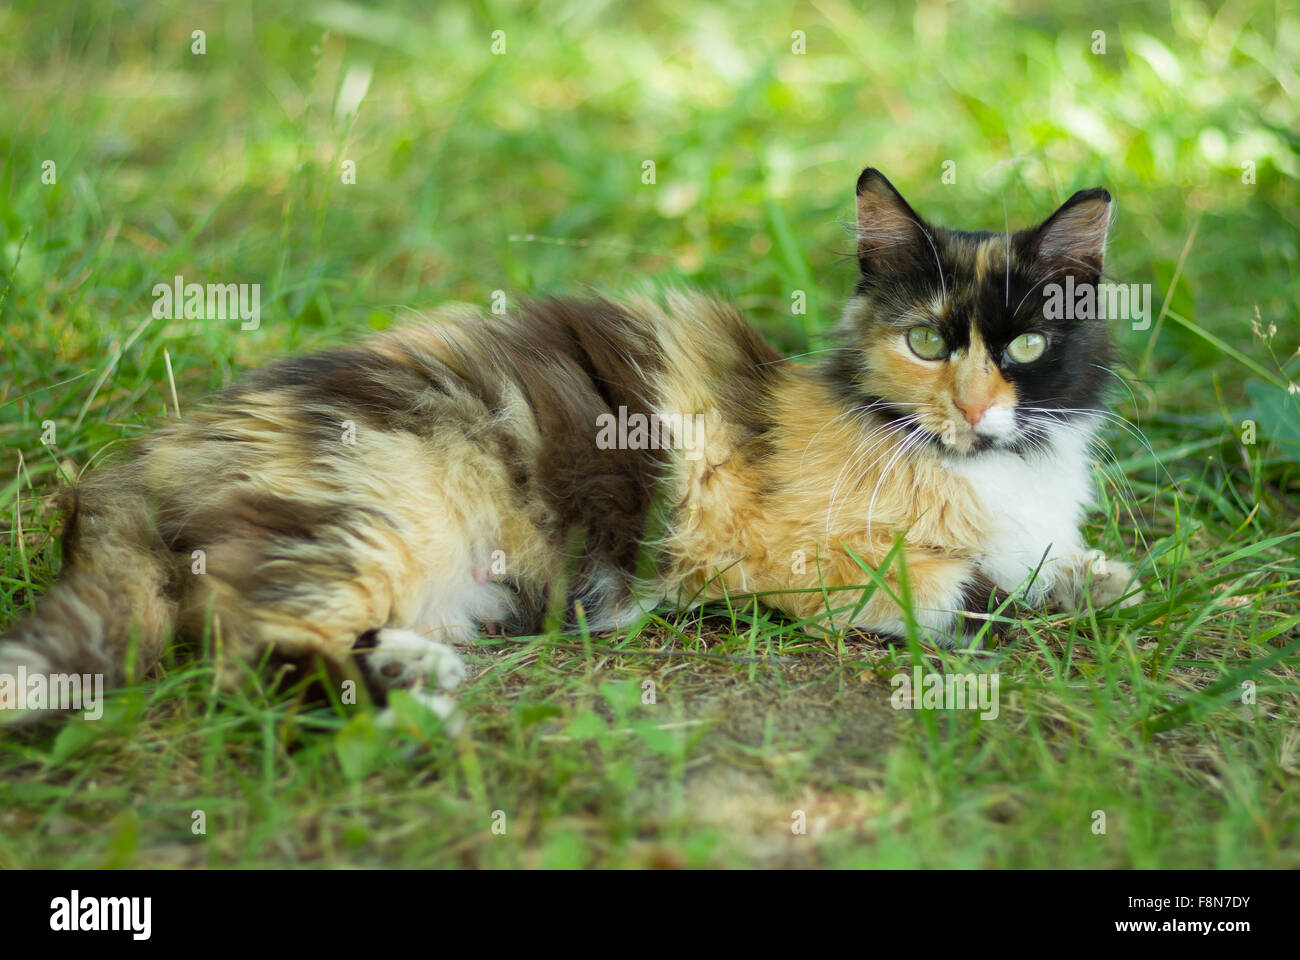 Three colored cat laying in shady place in the summer grass Stock Photo